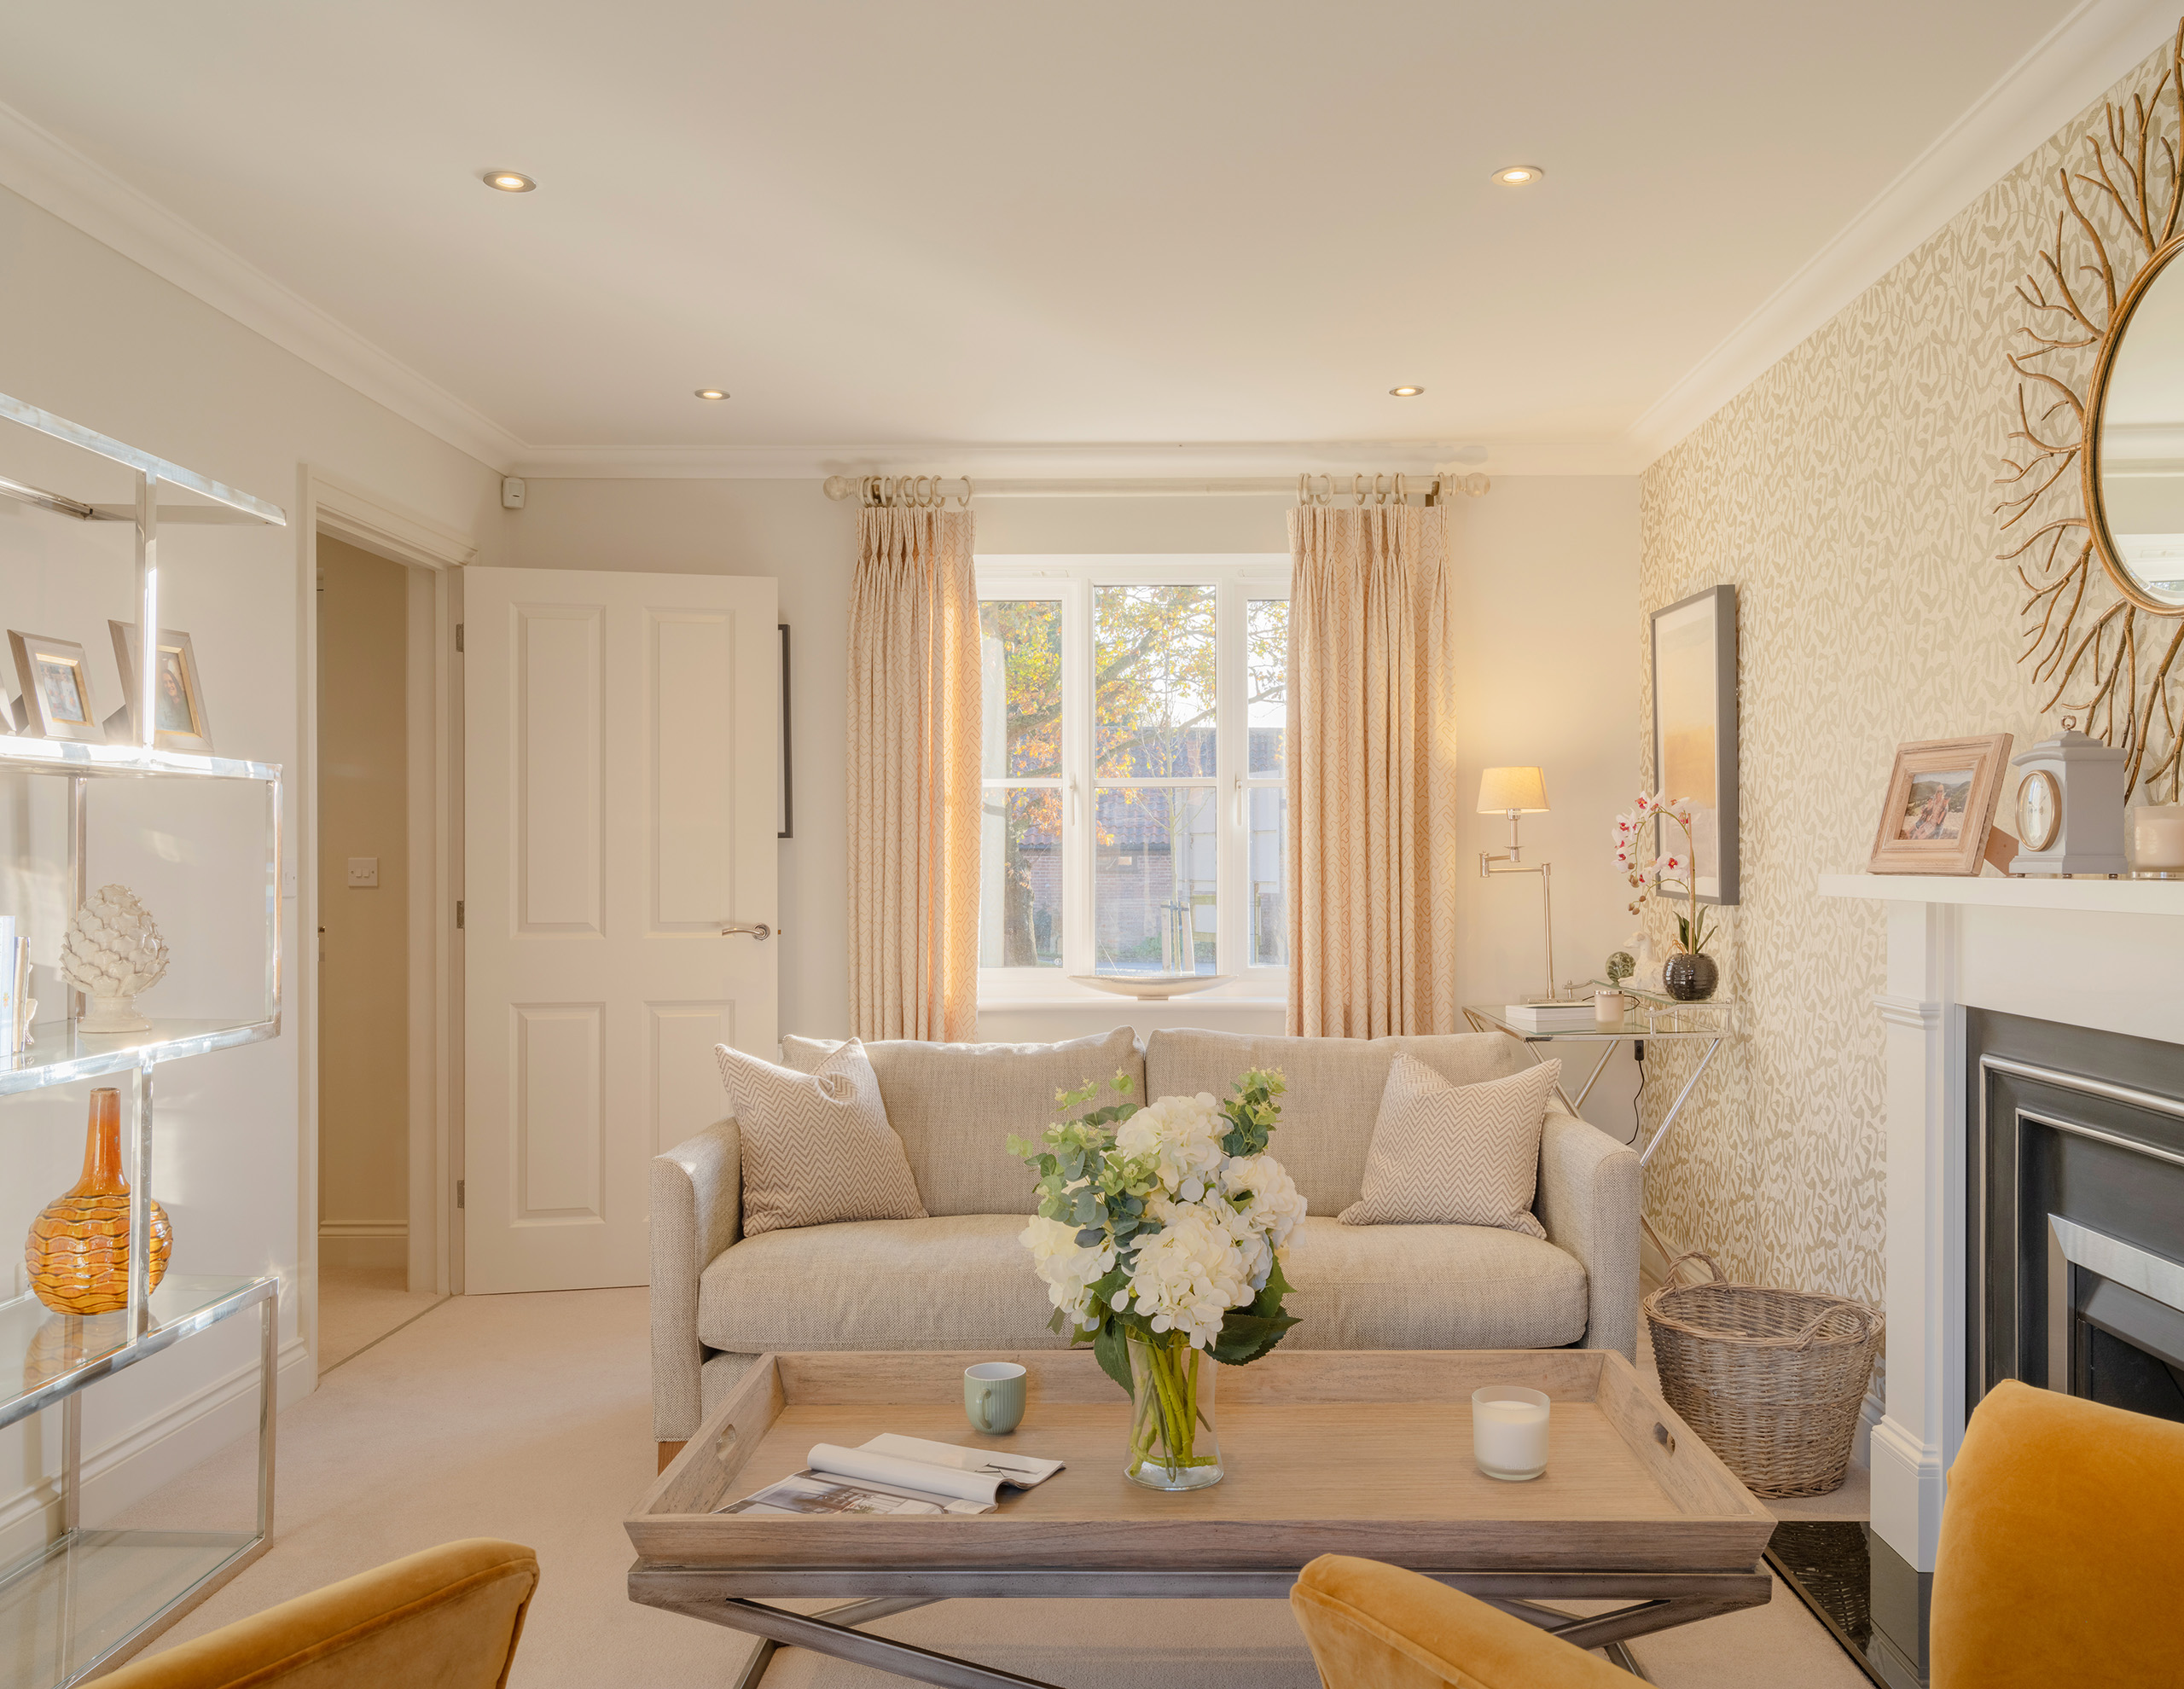 The living room at the Hopkins Homes St George's Place show home